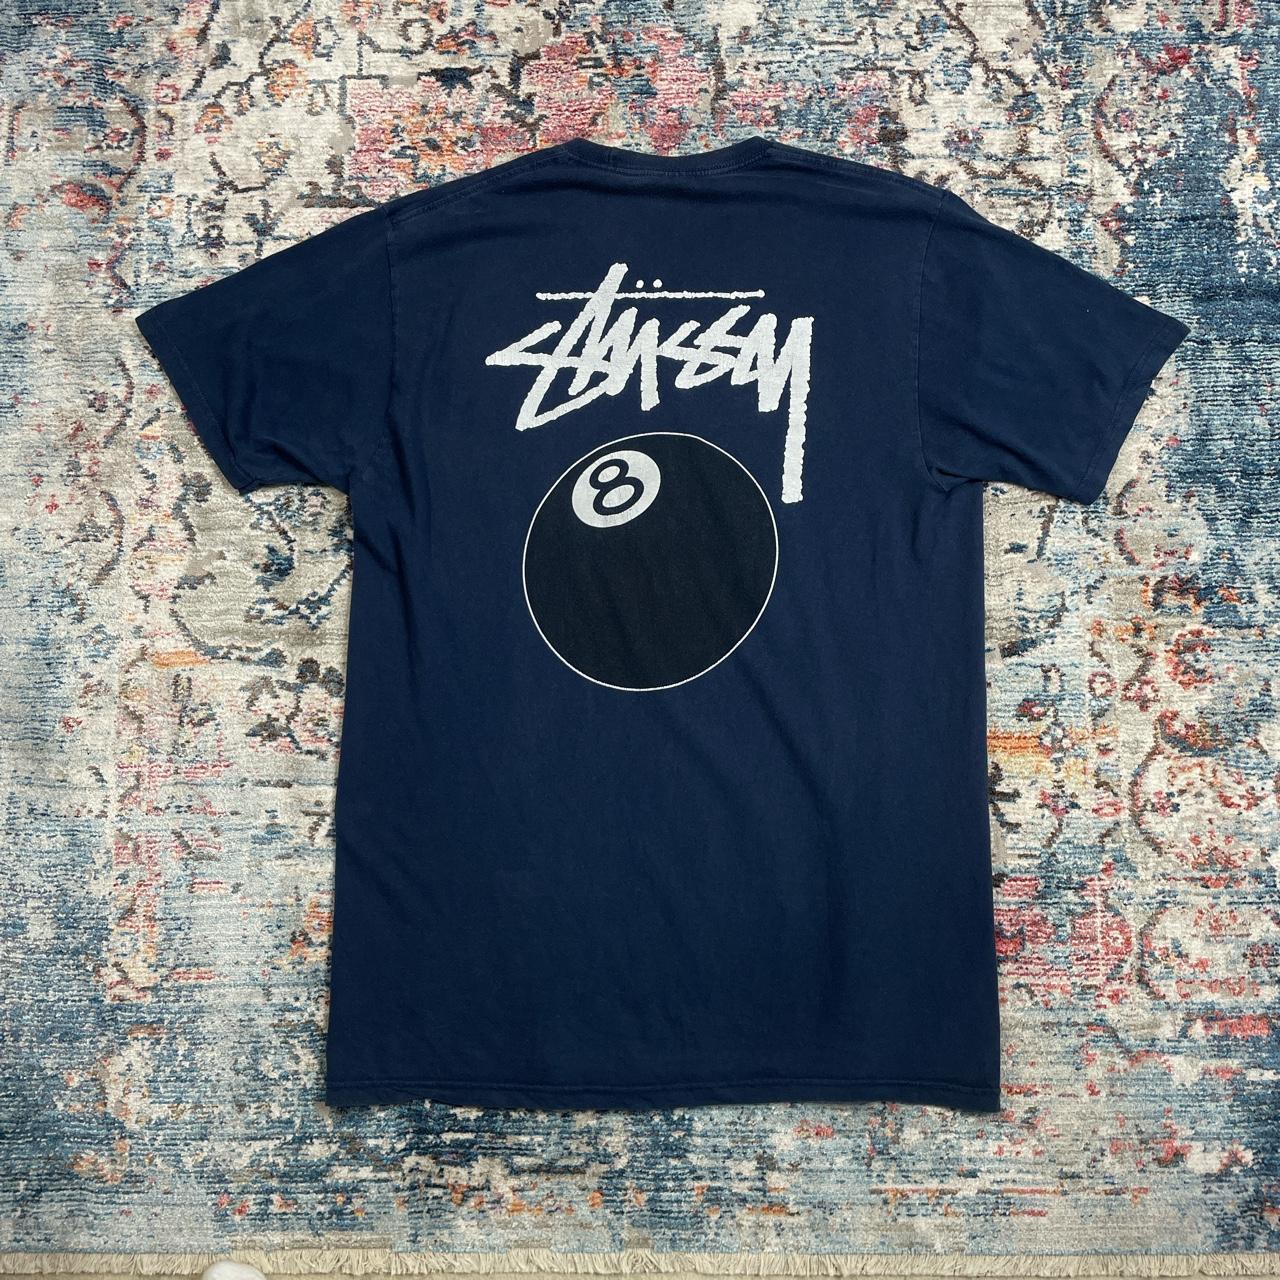 Vintage Stussy No.4 Navy Blue 8 Ball Spellout Print Tee